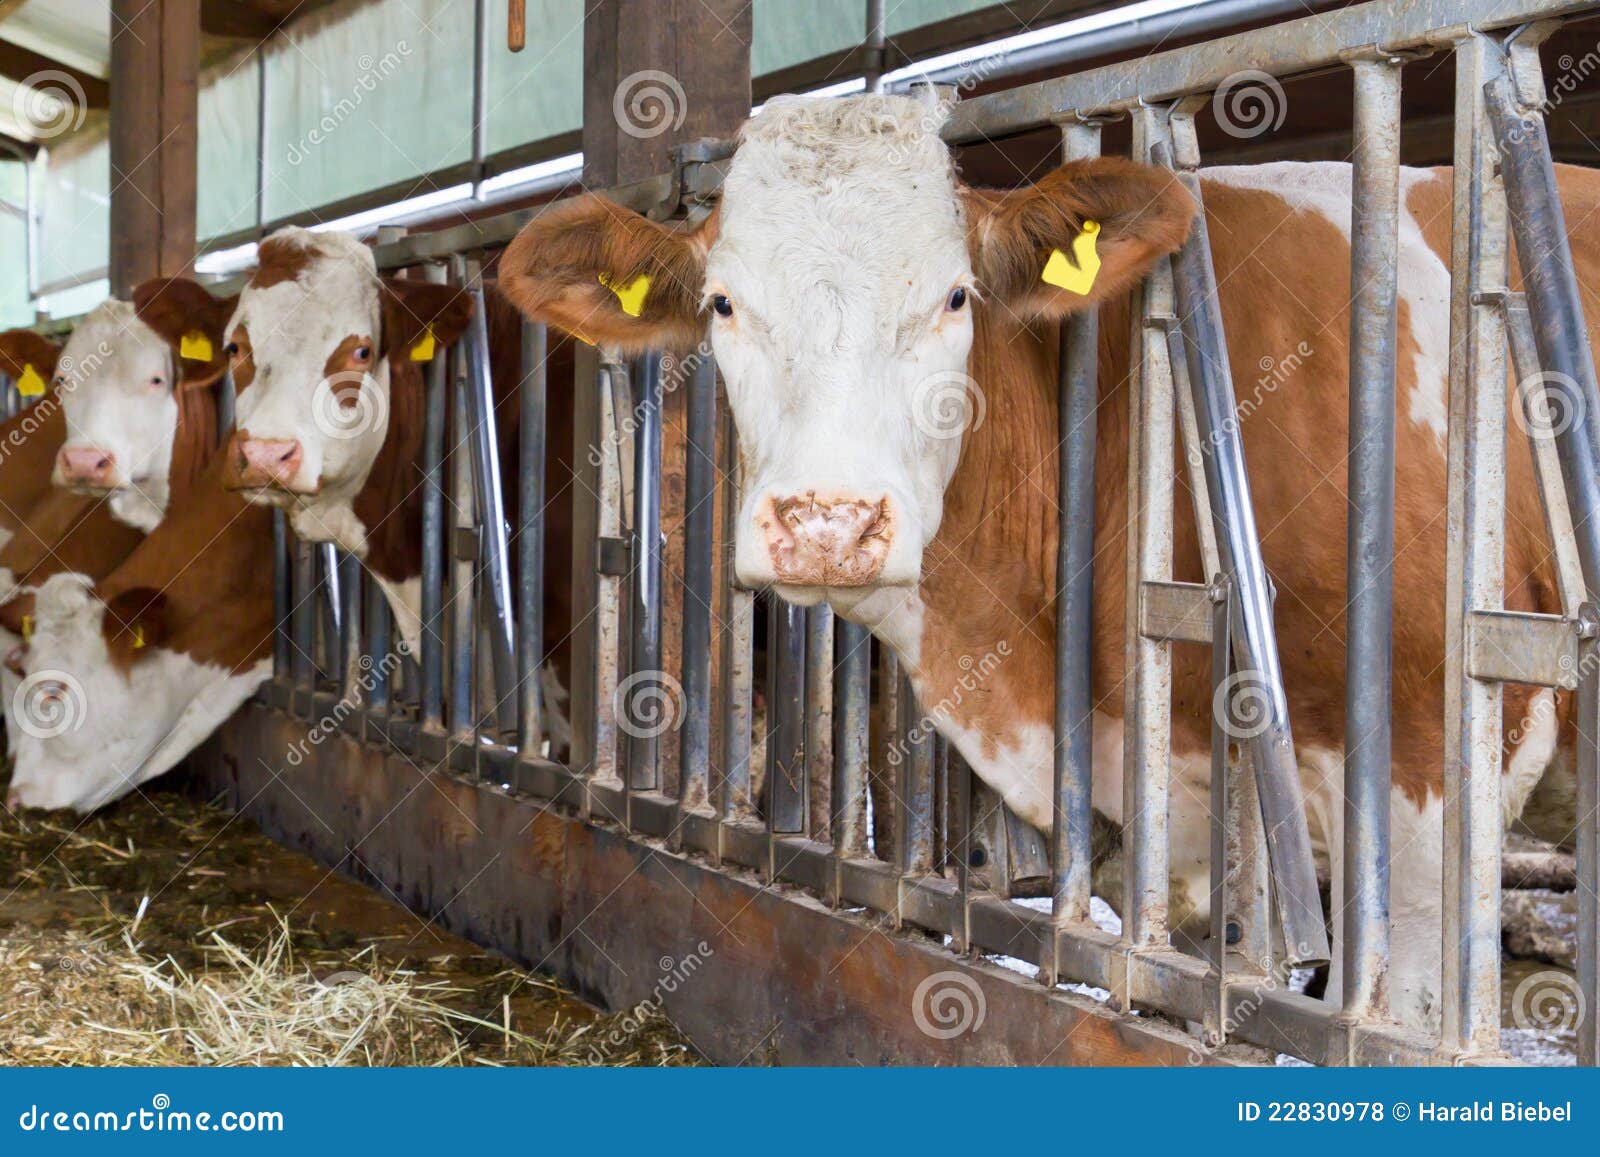 Cows In A Cow Shed Royalty Free Stock Photos - Image: 22830978